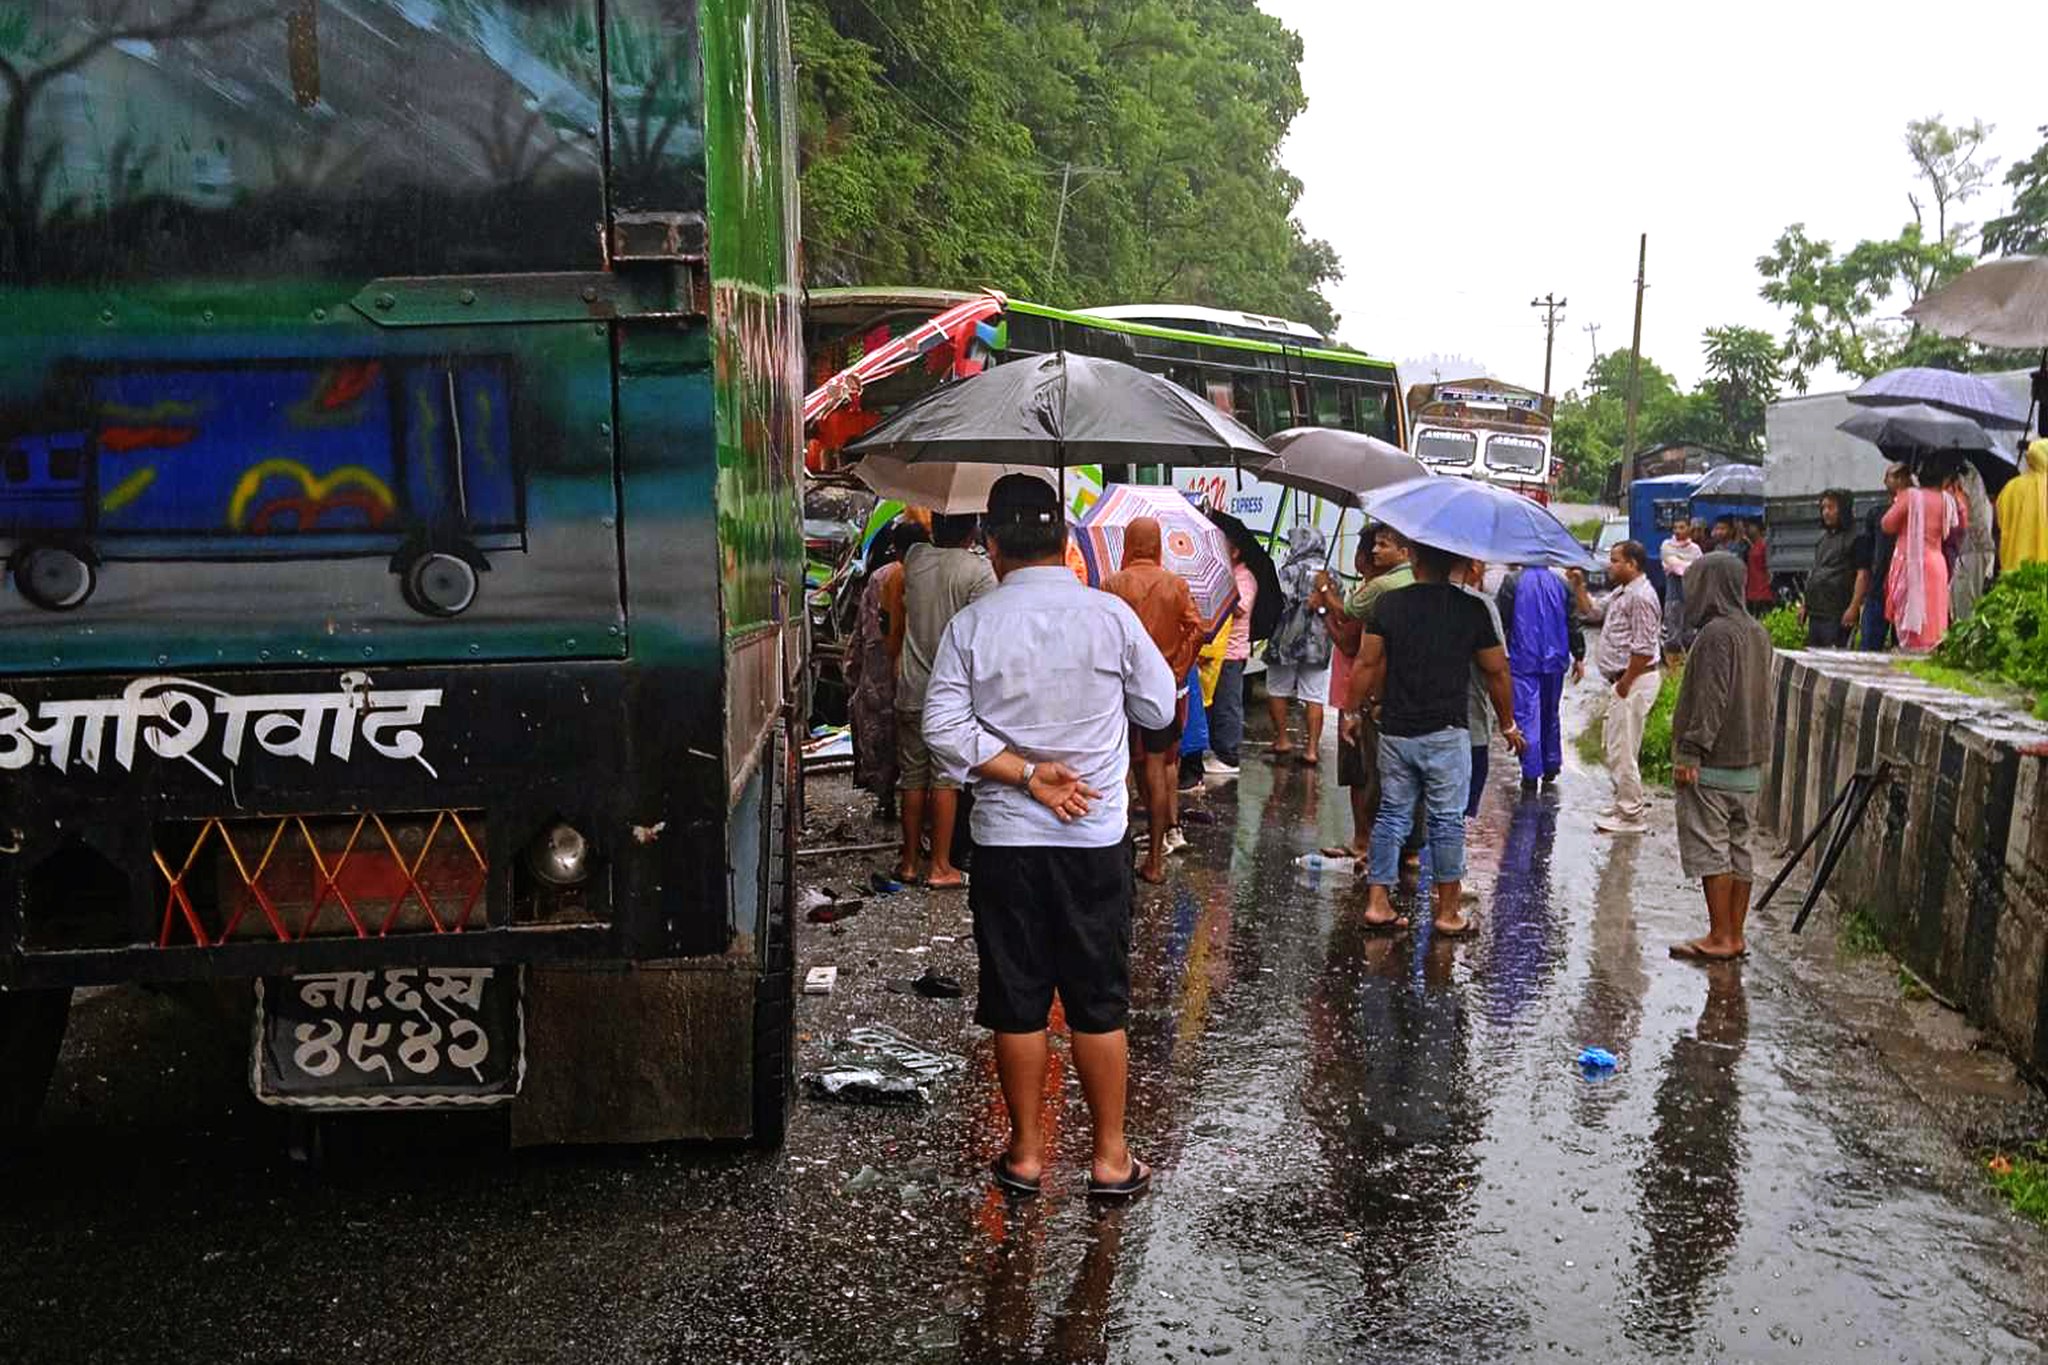 Thirty injured in bus-truck collision